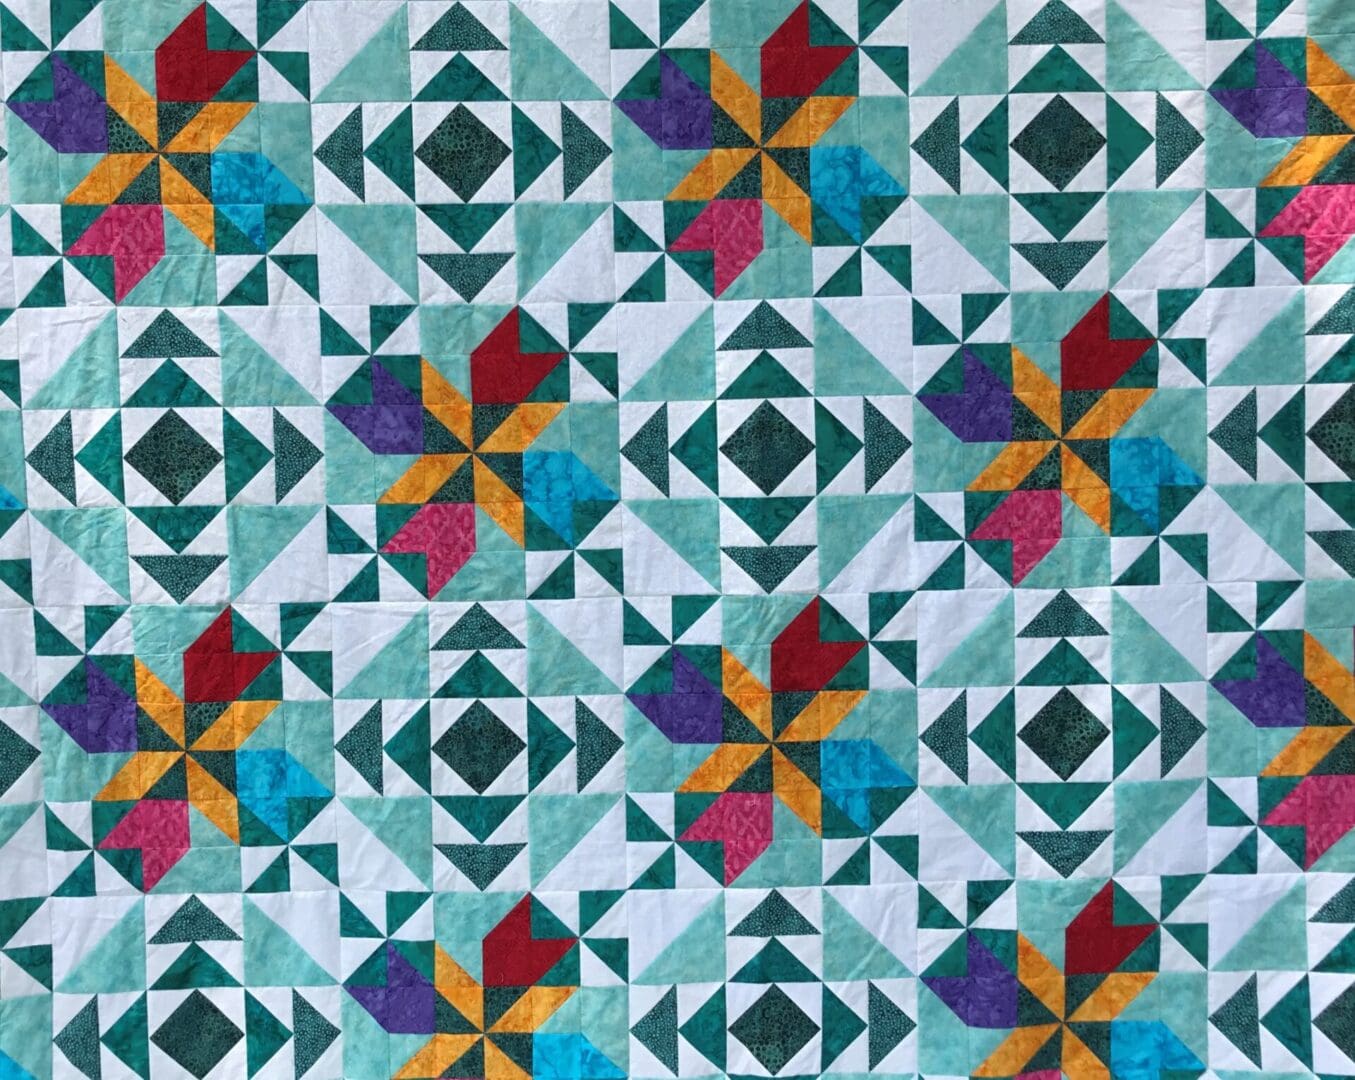 A quilt with different colored designs on it.